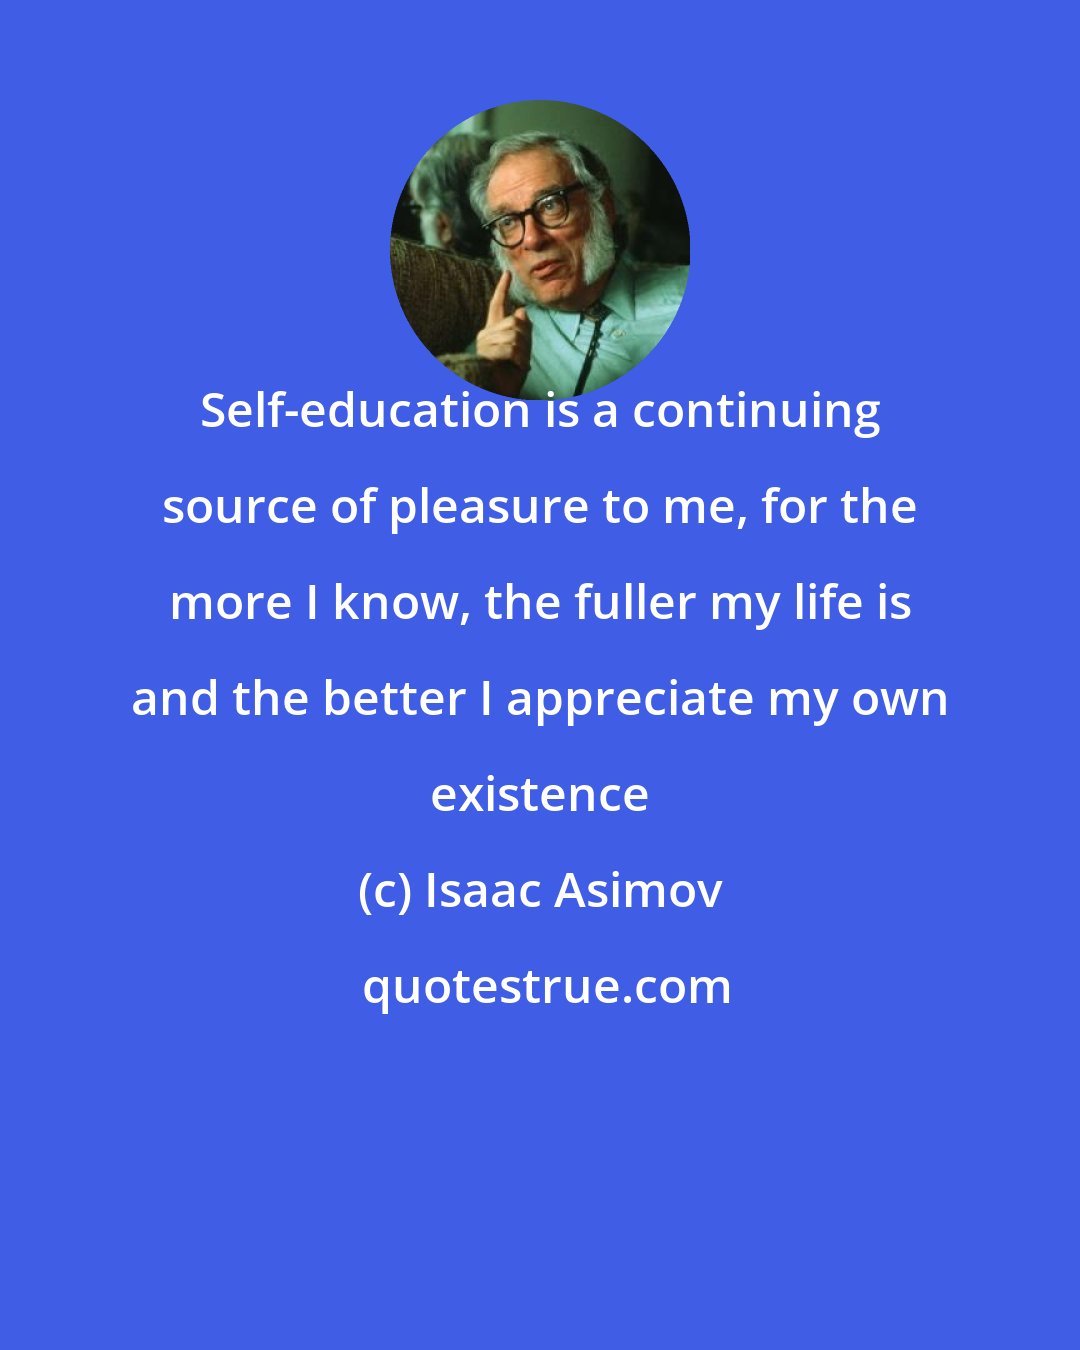 Isaac Asimov: Self-education is a continuing source of pleasure to me, for the more I know, the fuller my life is and the better I appreciate my own existence